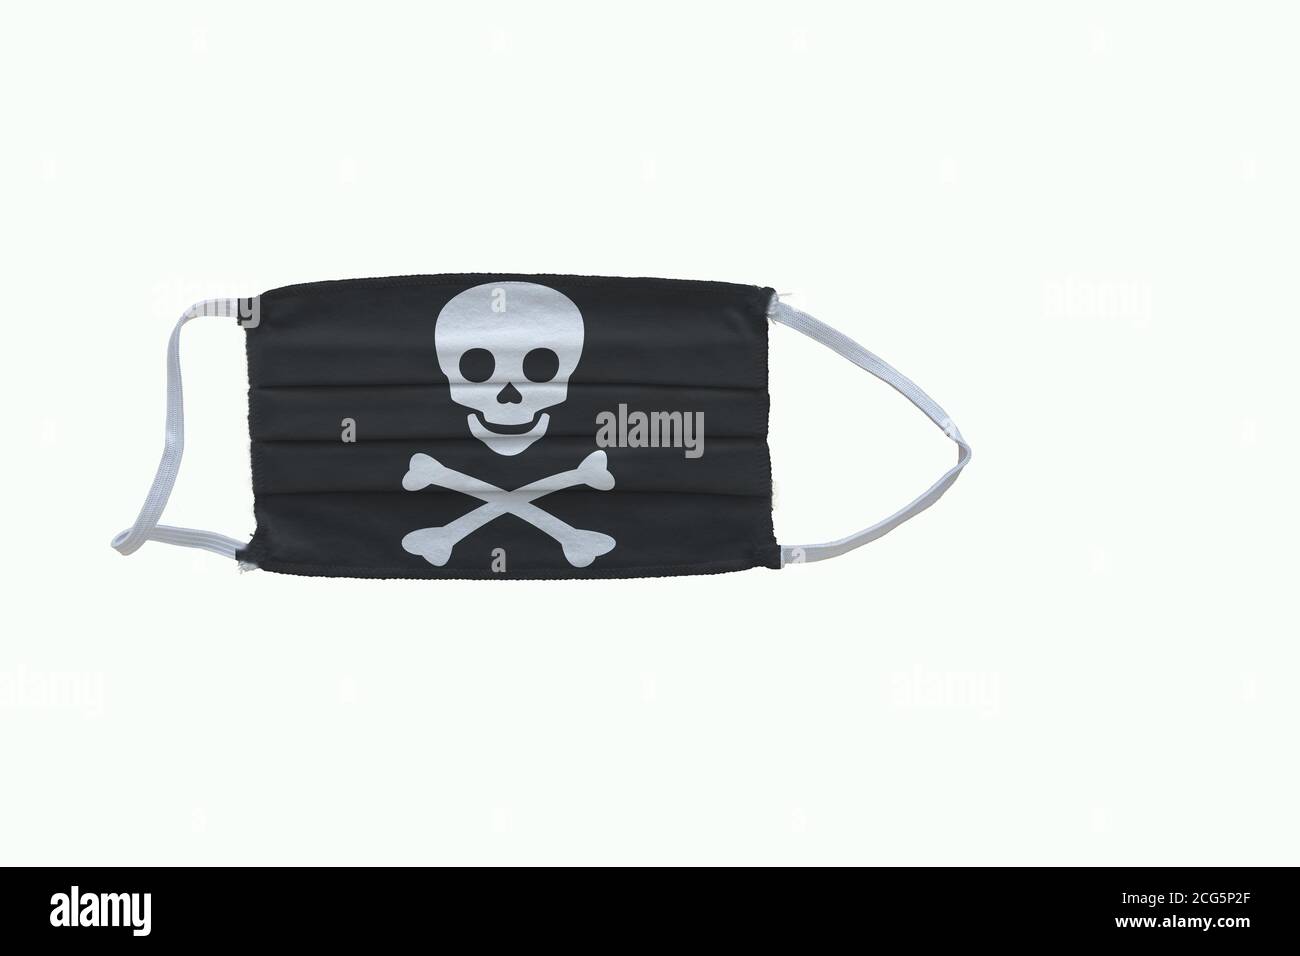 Jolly Roger flag design Covid-19 pandemic  virus face mask  on a white background with copy space Stock Photo